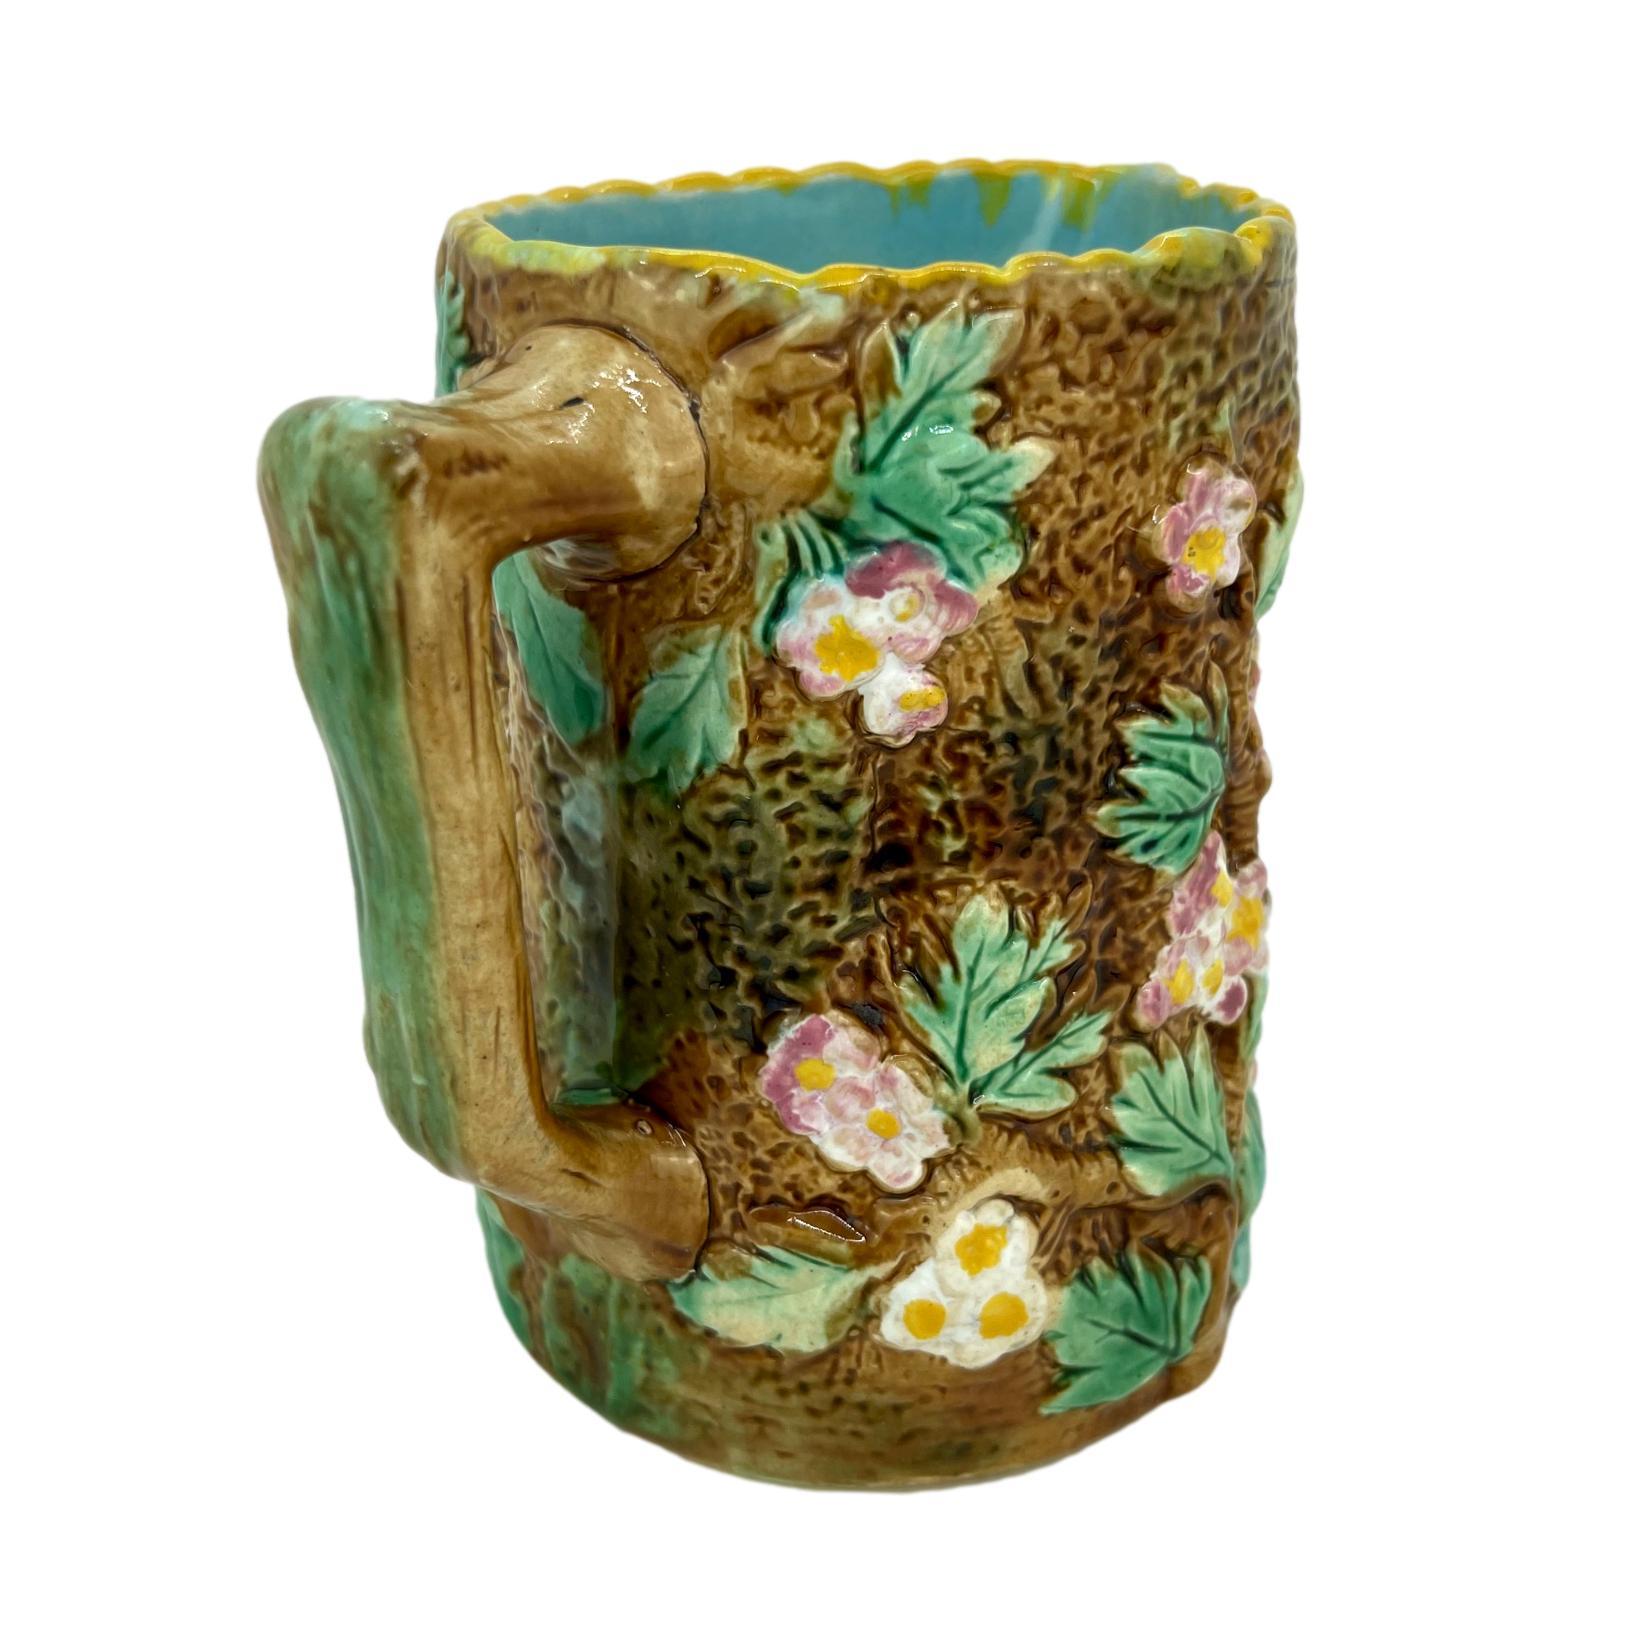 George Jones Majolica Pitcher, molded in high relief as a hawthorn tree, with branches, leaves, and pink blossoms on a mossy bark ground, the branch handle glazed in brown with green moss, the rim glazed in ochre, the reverse with painted design